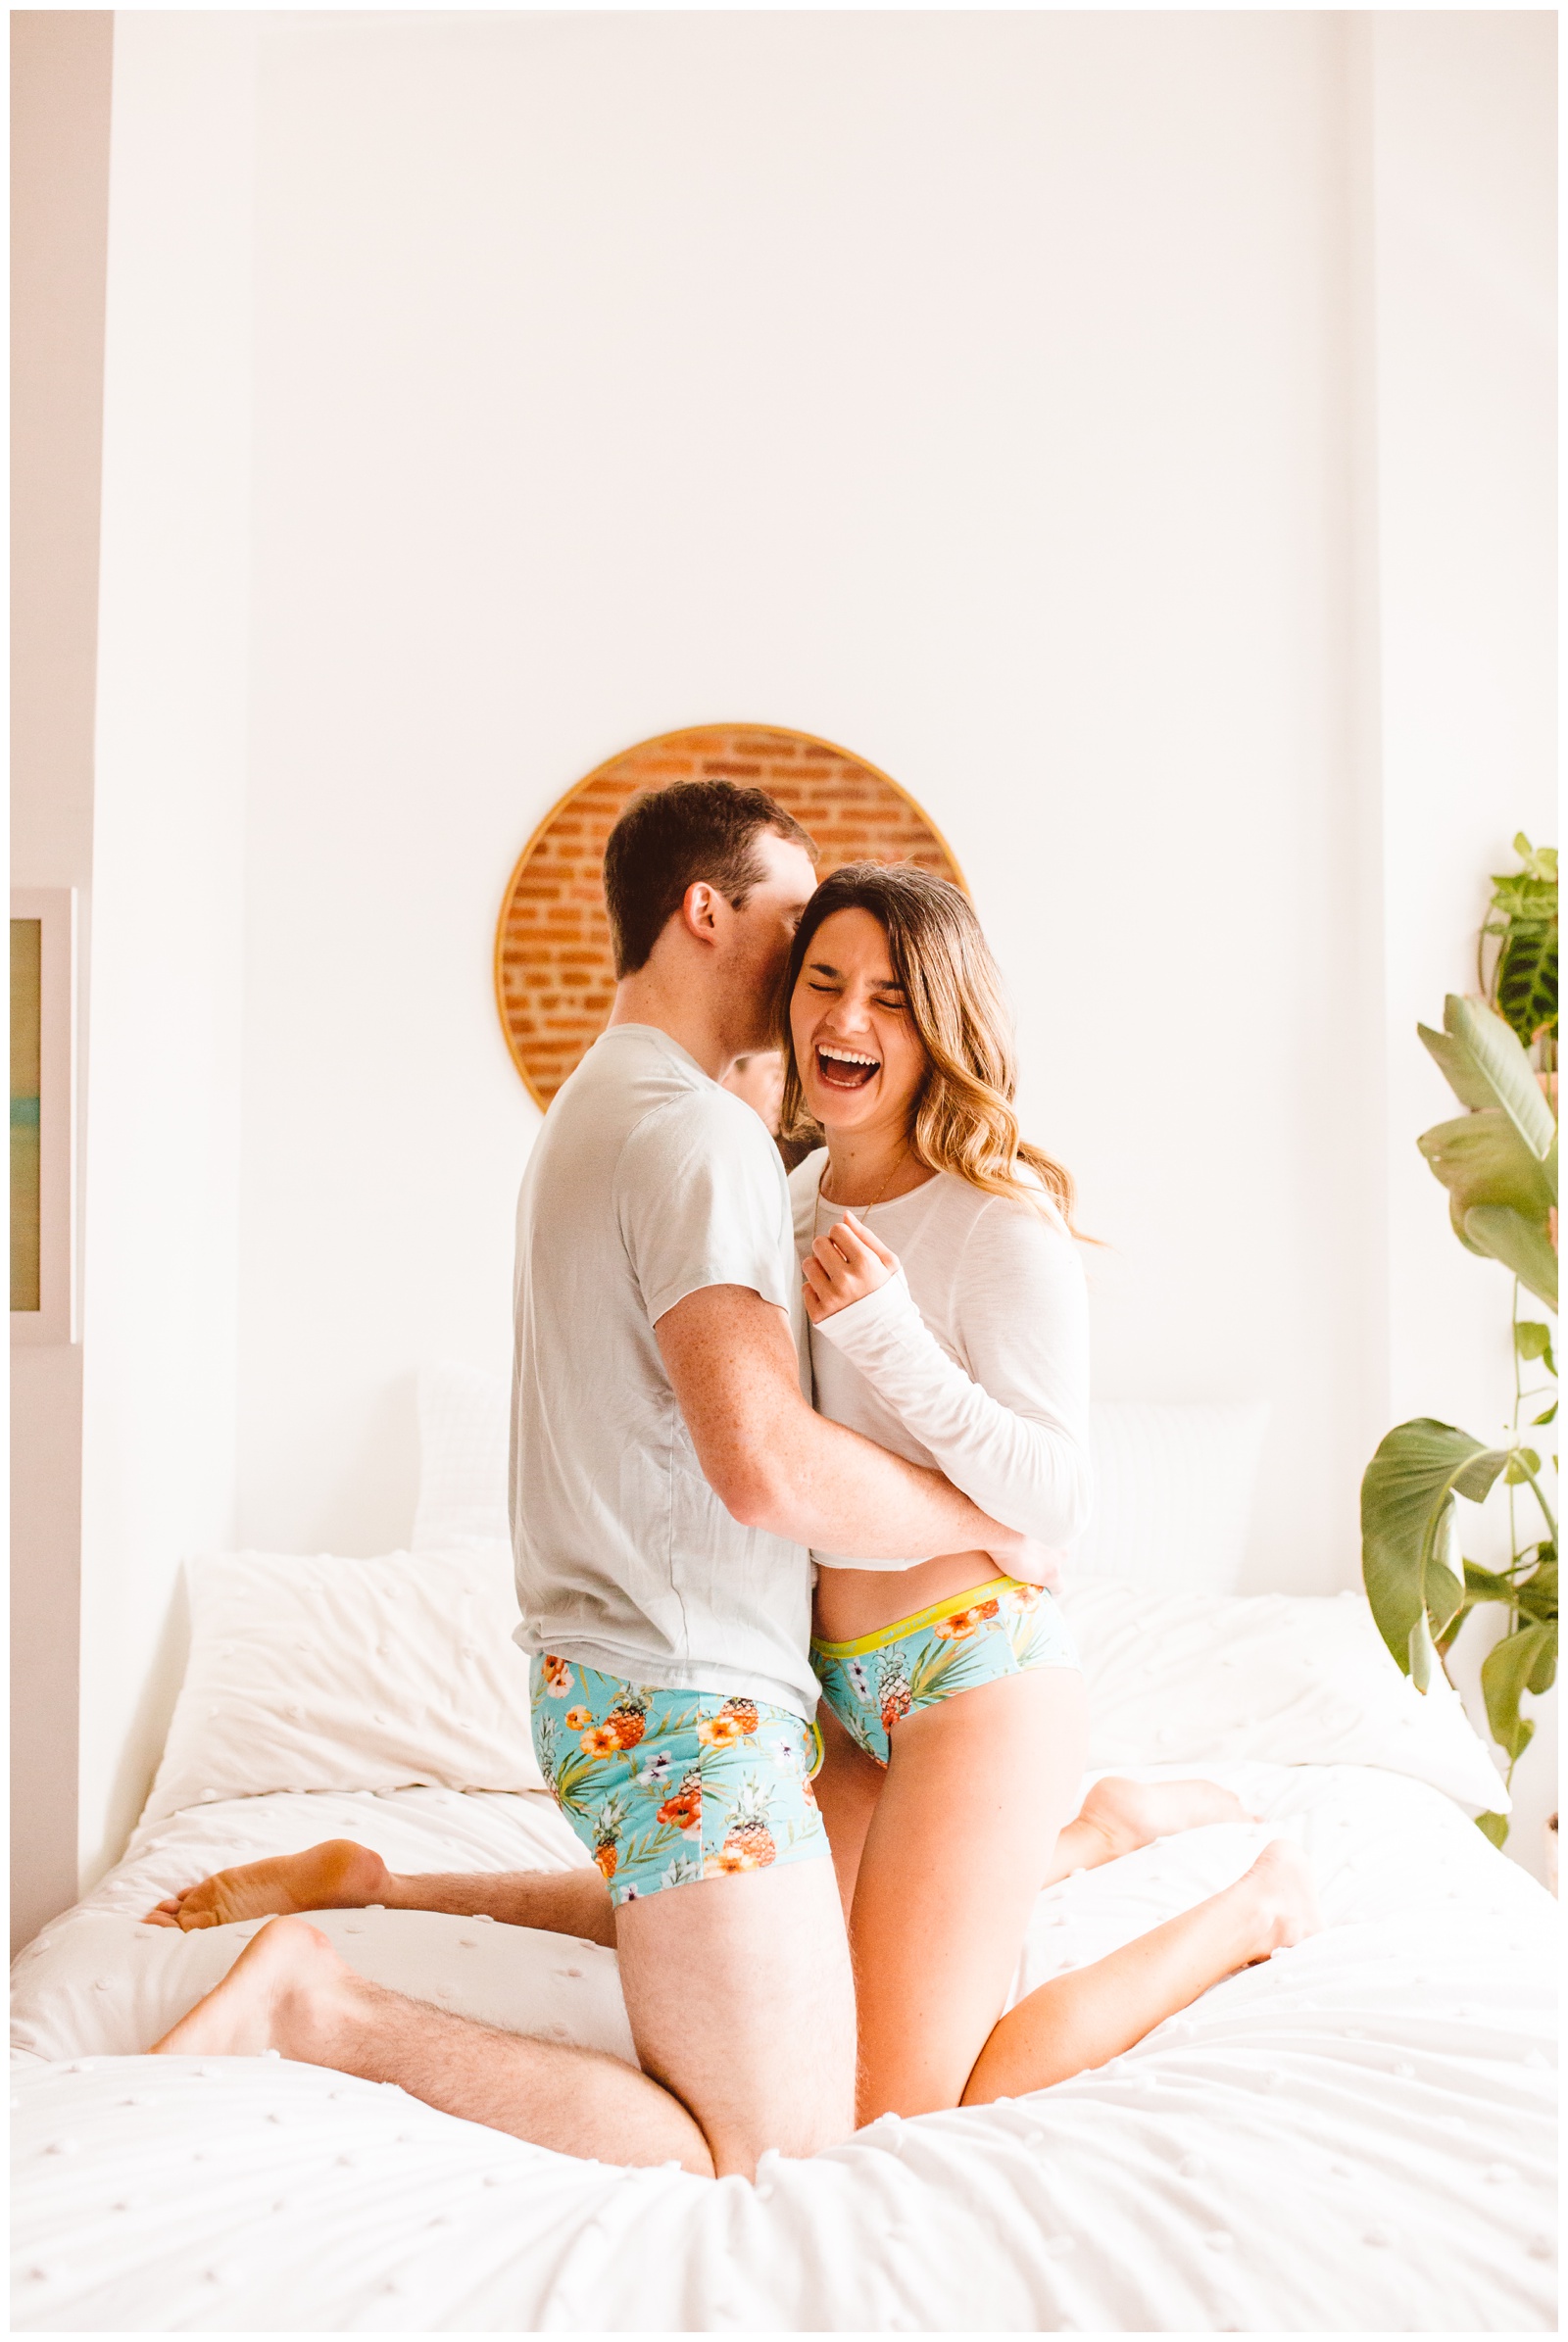 In Home Matching Undies Playful Lifestyle Couples Session - Baltimore, MD - Brooke Michelle Photography